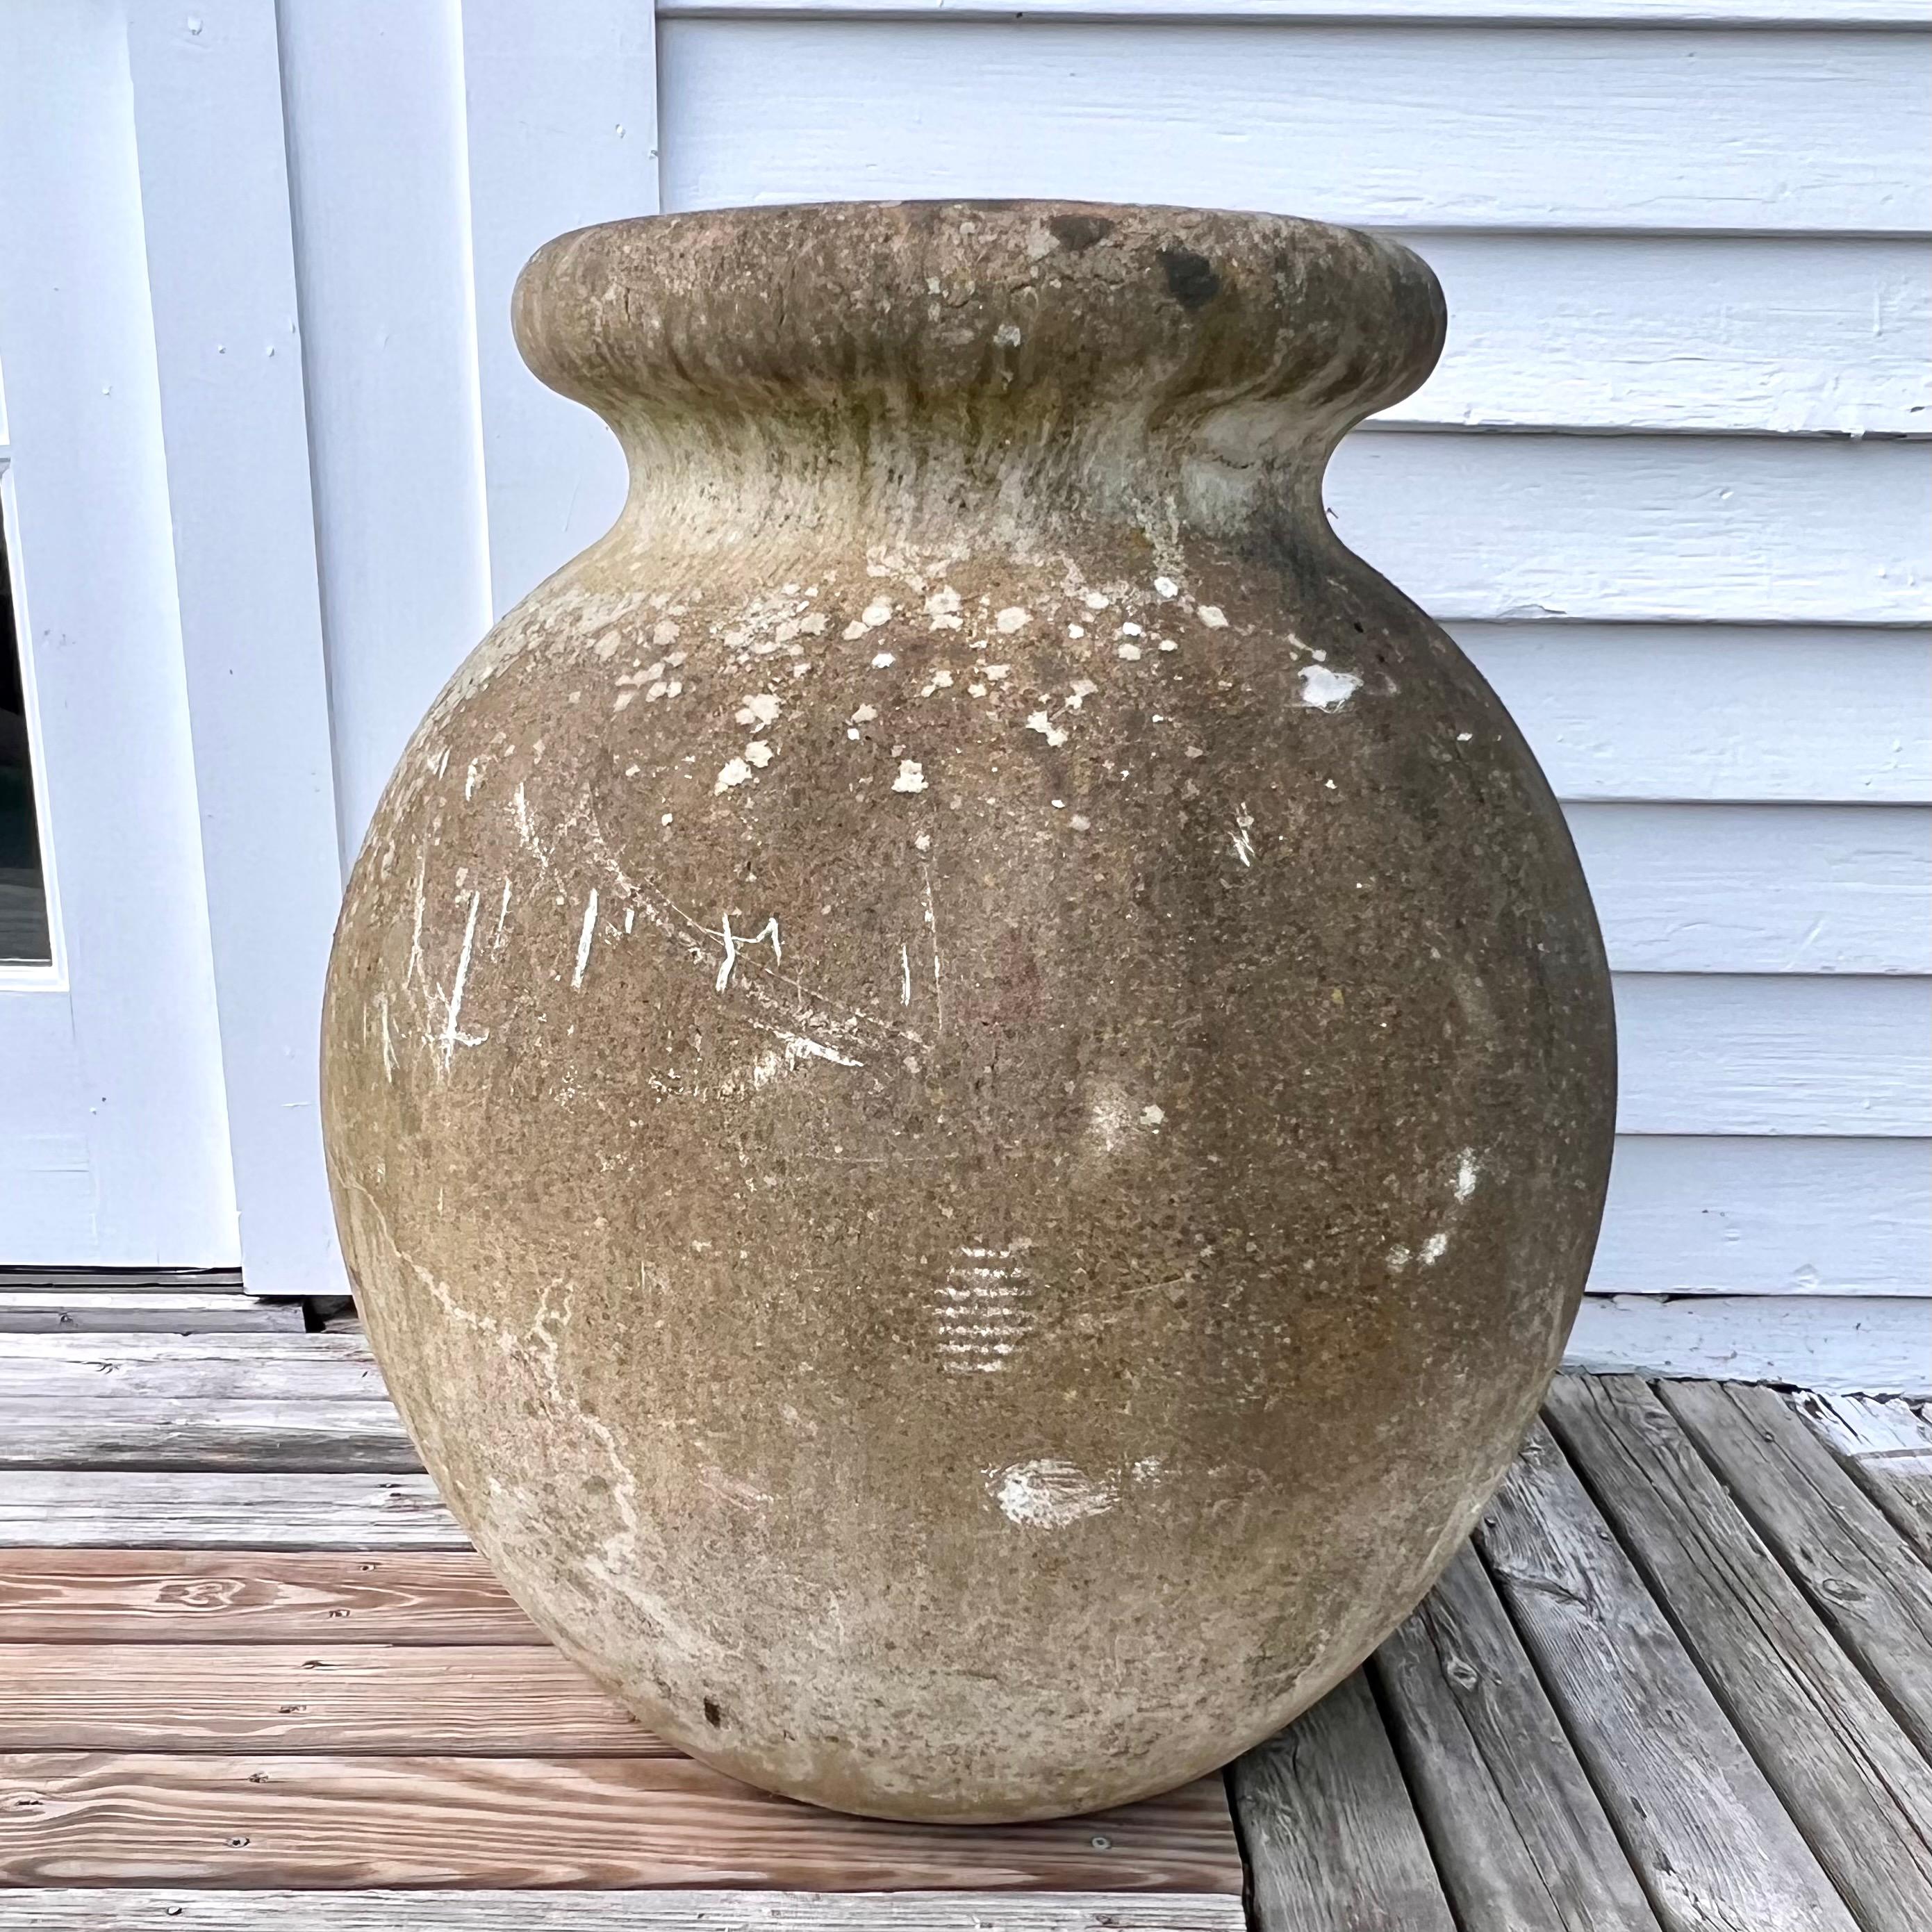 Oversized concrete olive jar planter by Willy Guhl with great patina and prominent presence. Simple and elegant design perfect for any garden or patio. Excellent patina and vintage condition. Multiple available in this size with varying degrees of